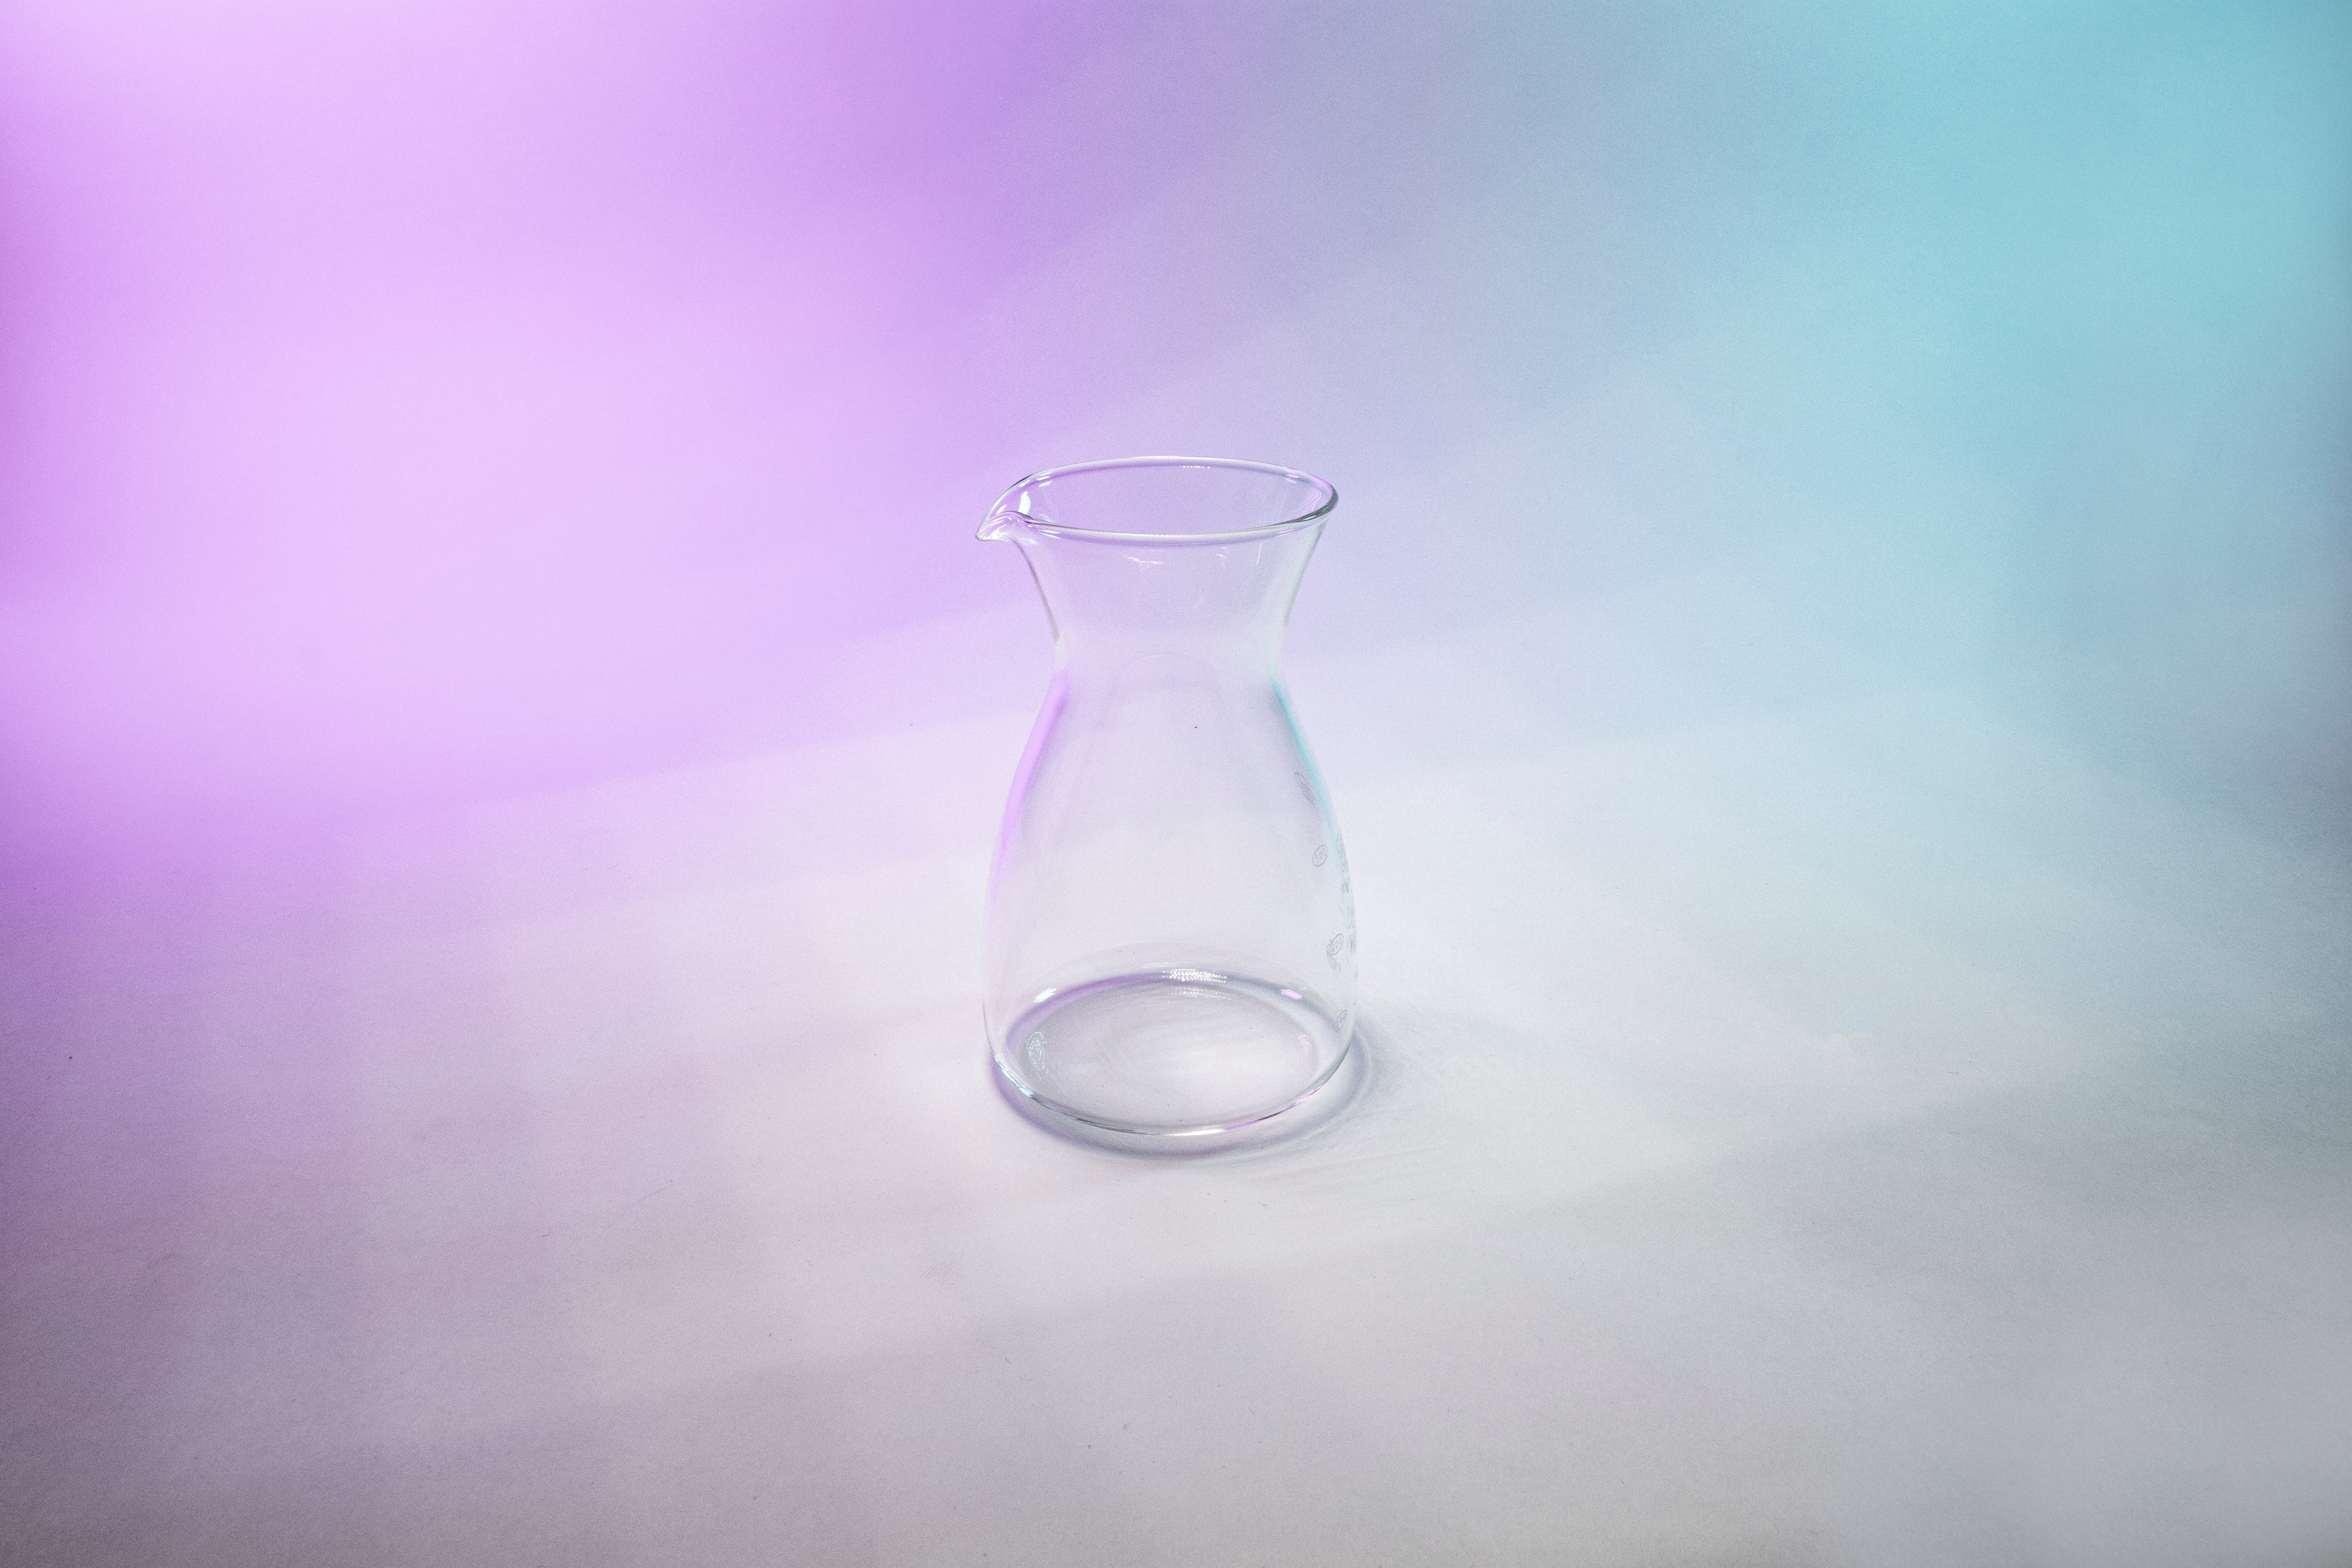 Tapered glass coffee decanter with flared spout against a purple, gey, and blue background.